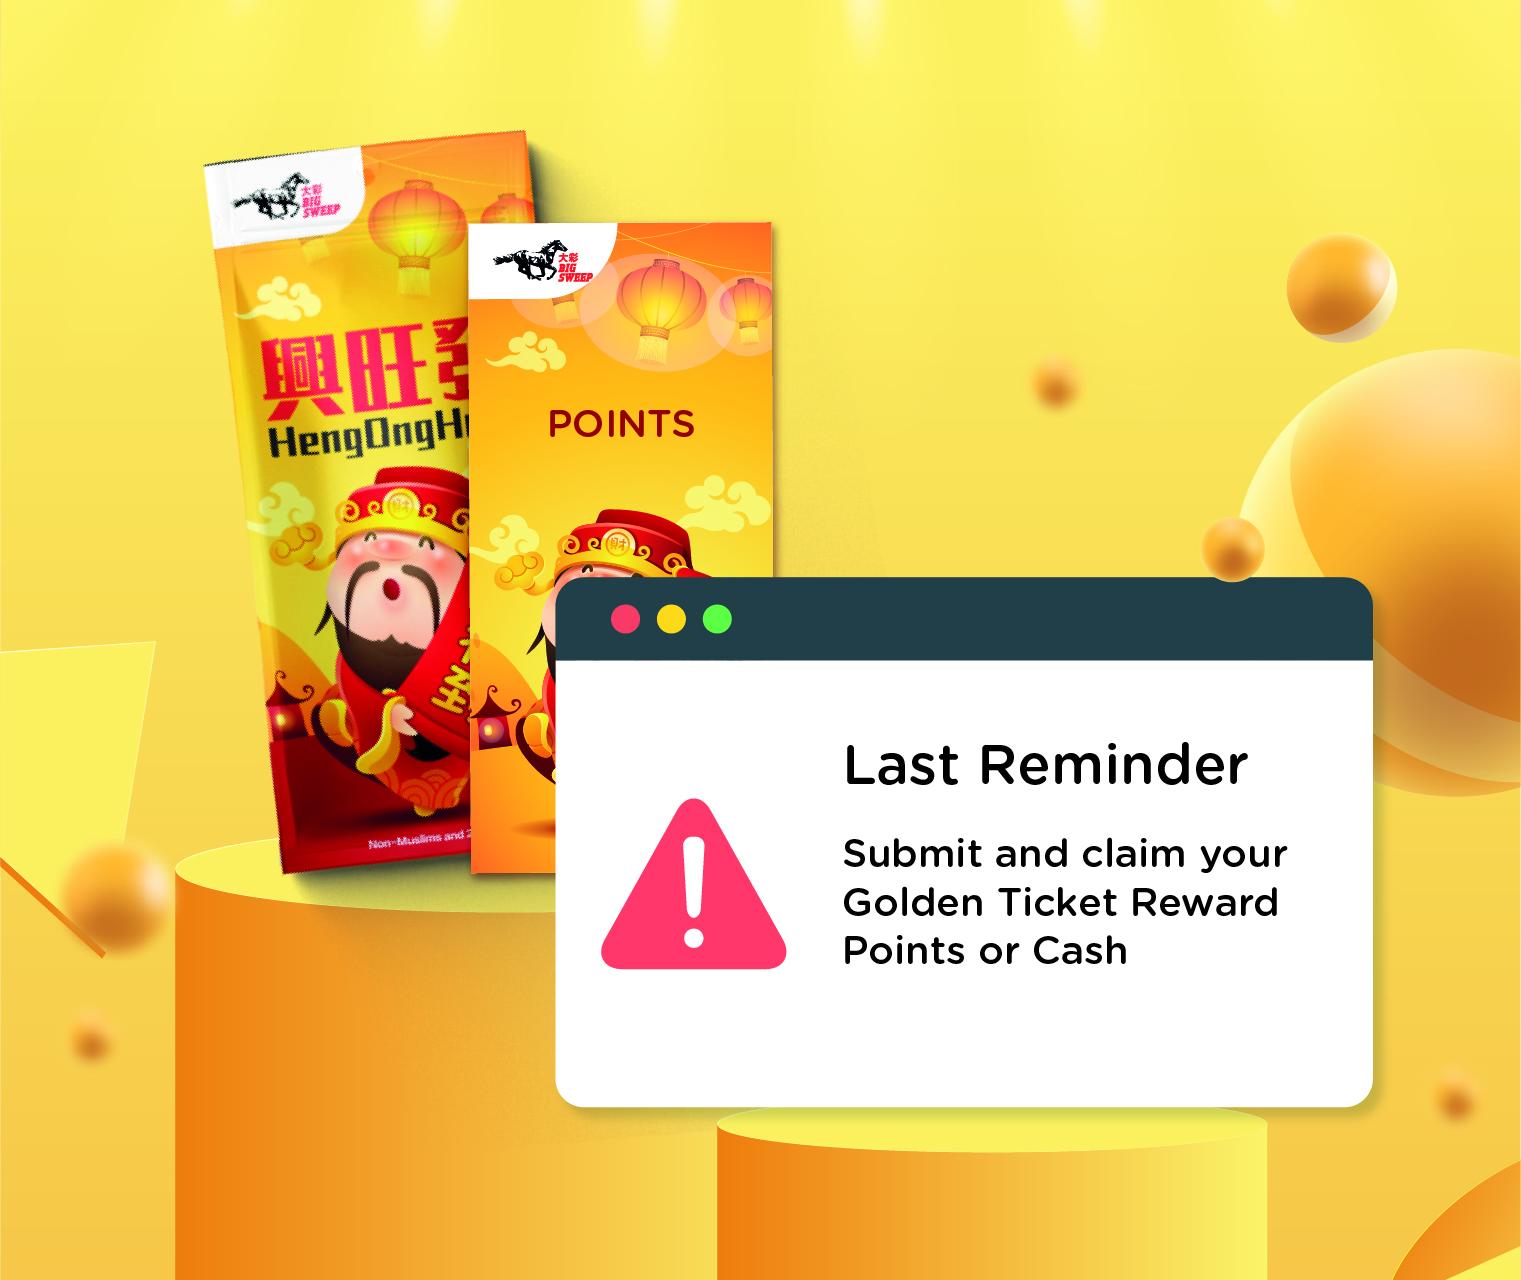 Last Reminder : Submit and claim your Golden Ticket Reward Points or Cash